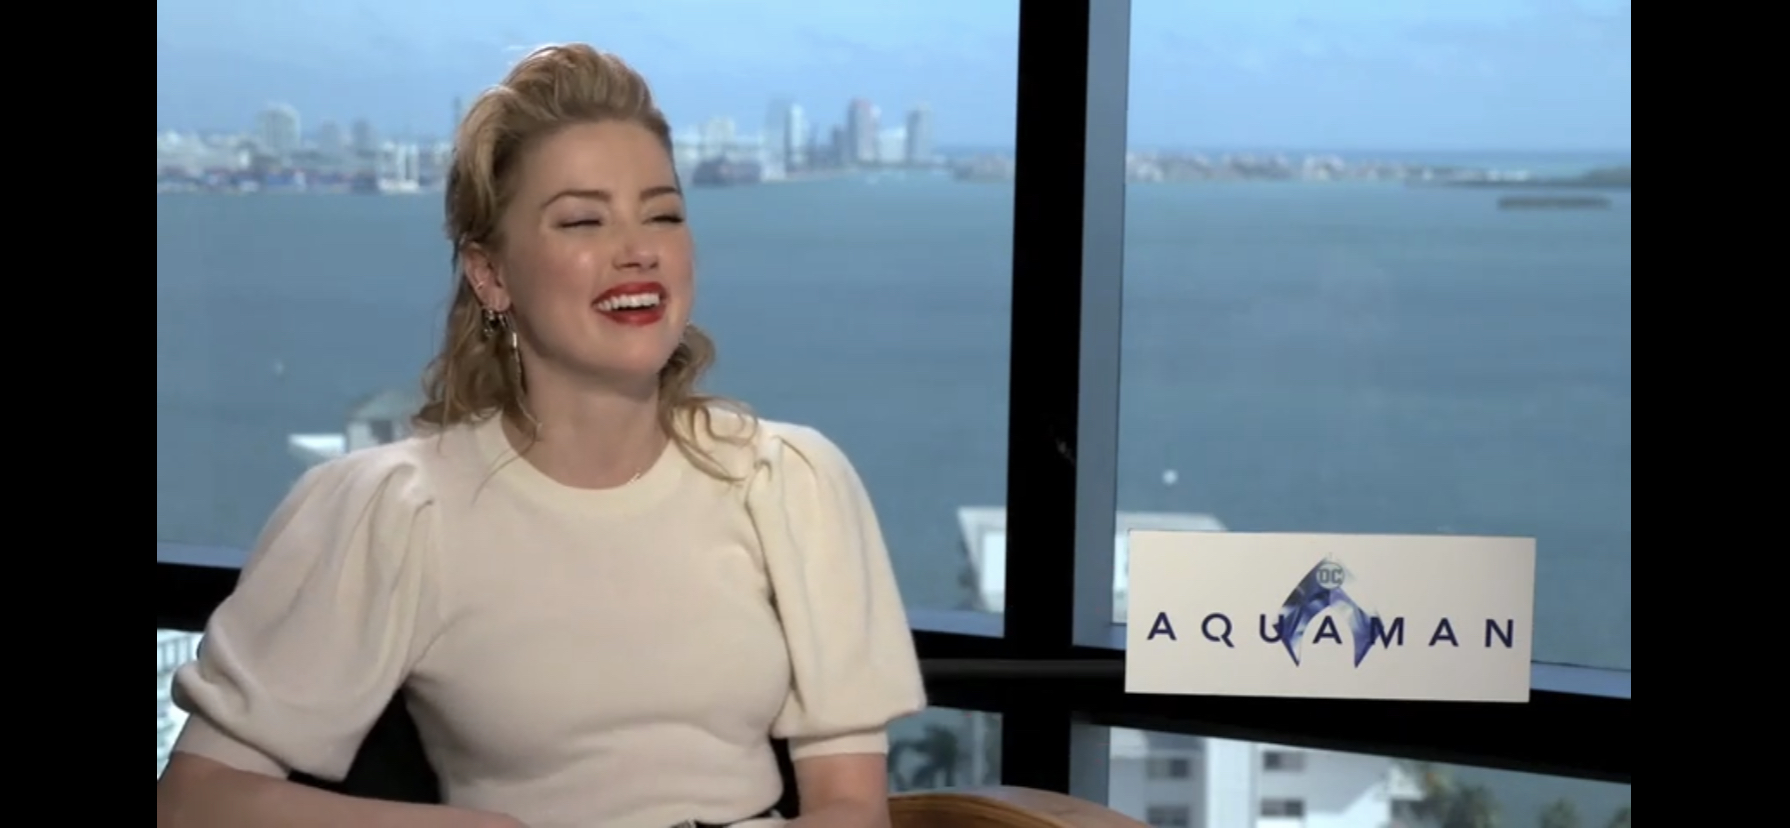 Aquaman Interview With Amber Heard